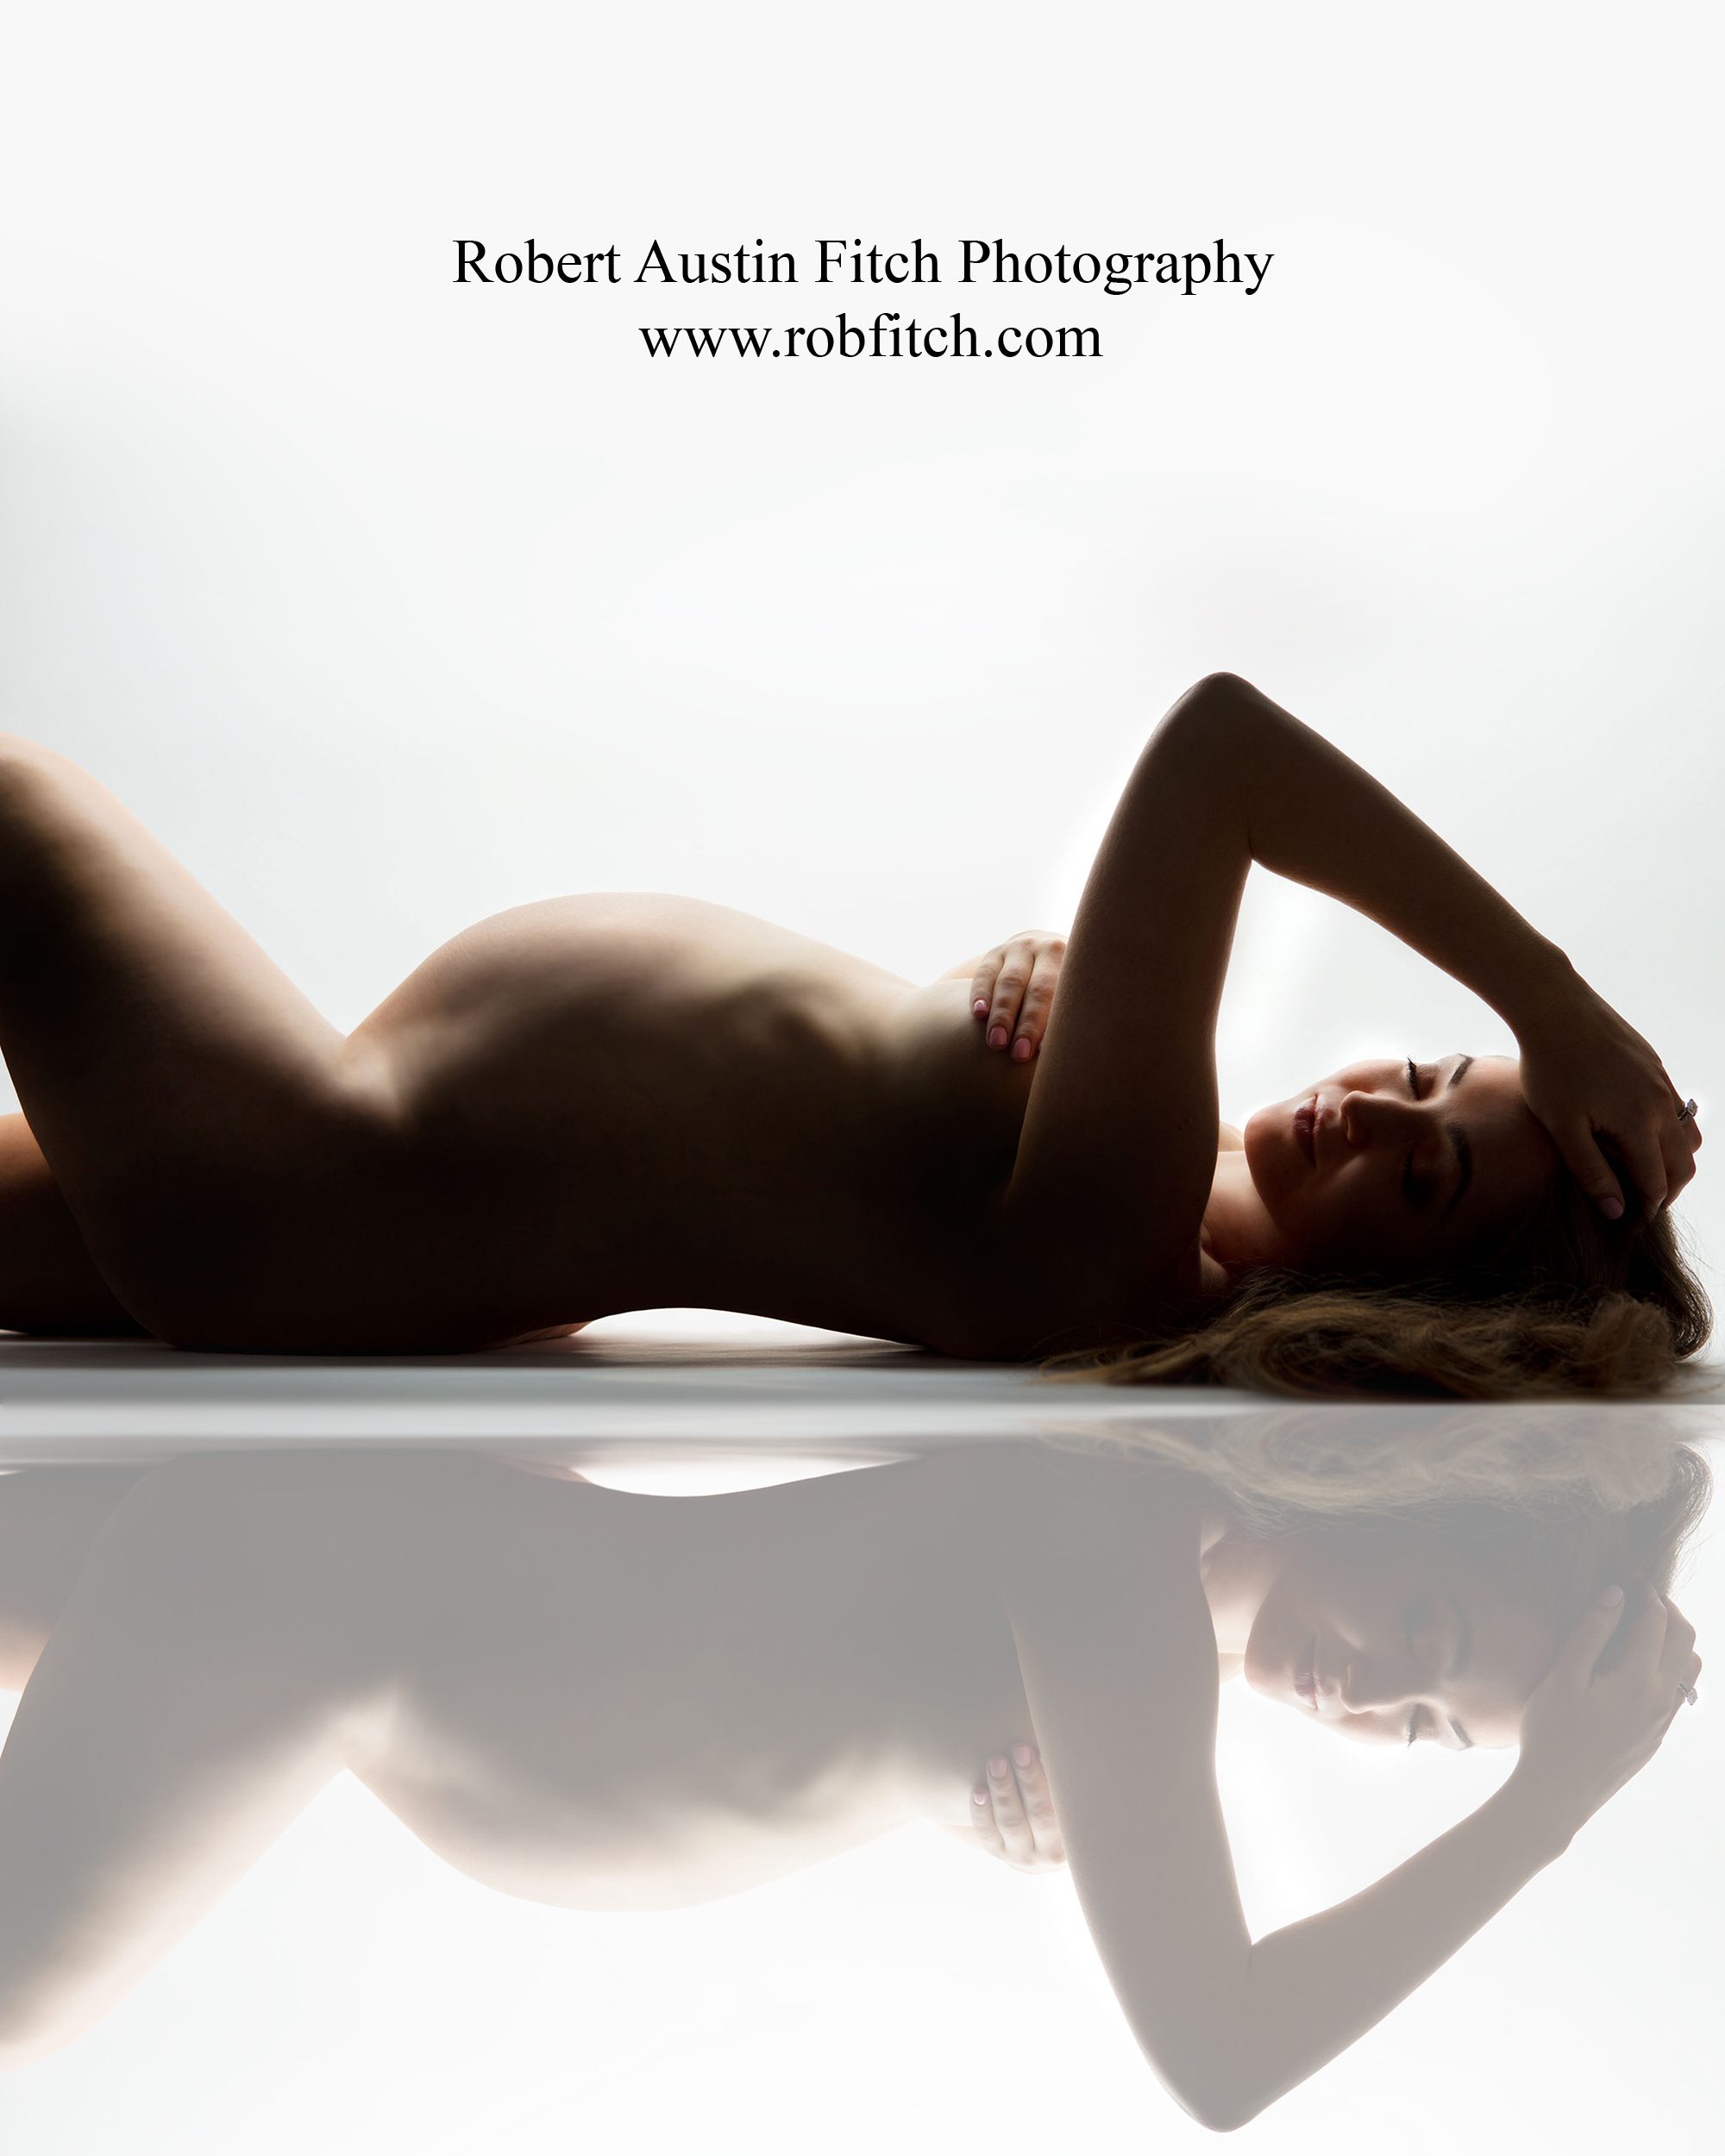 Artistic nude maternity photo in color of reclining pregnant woman